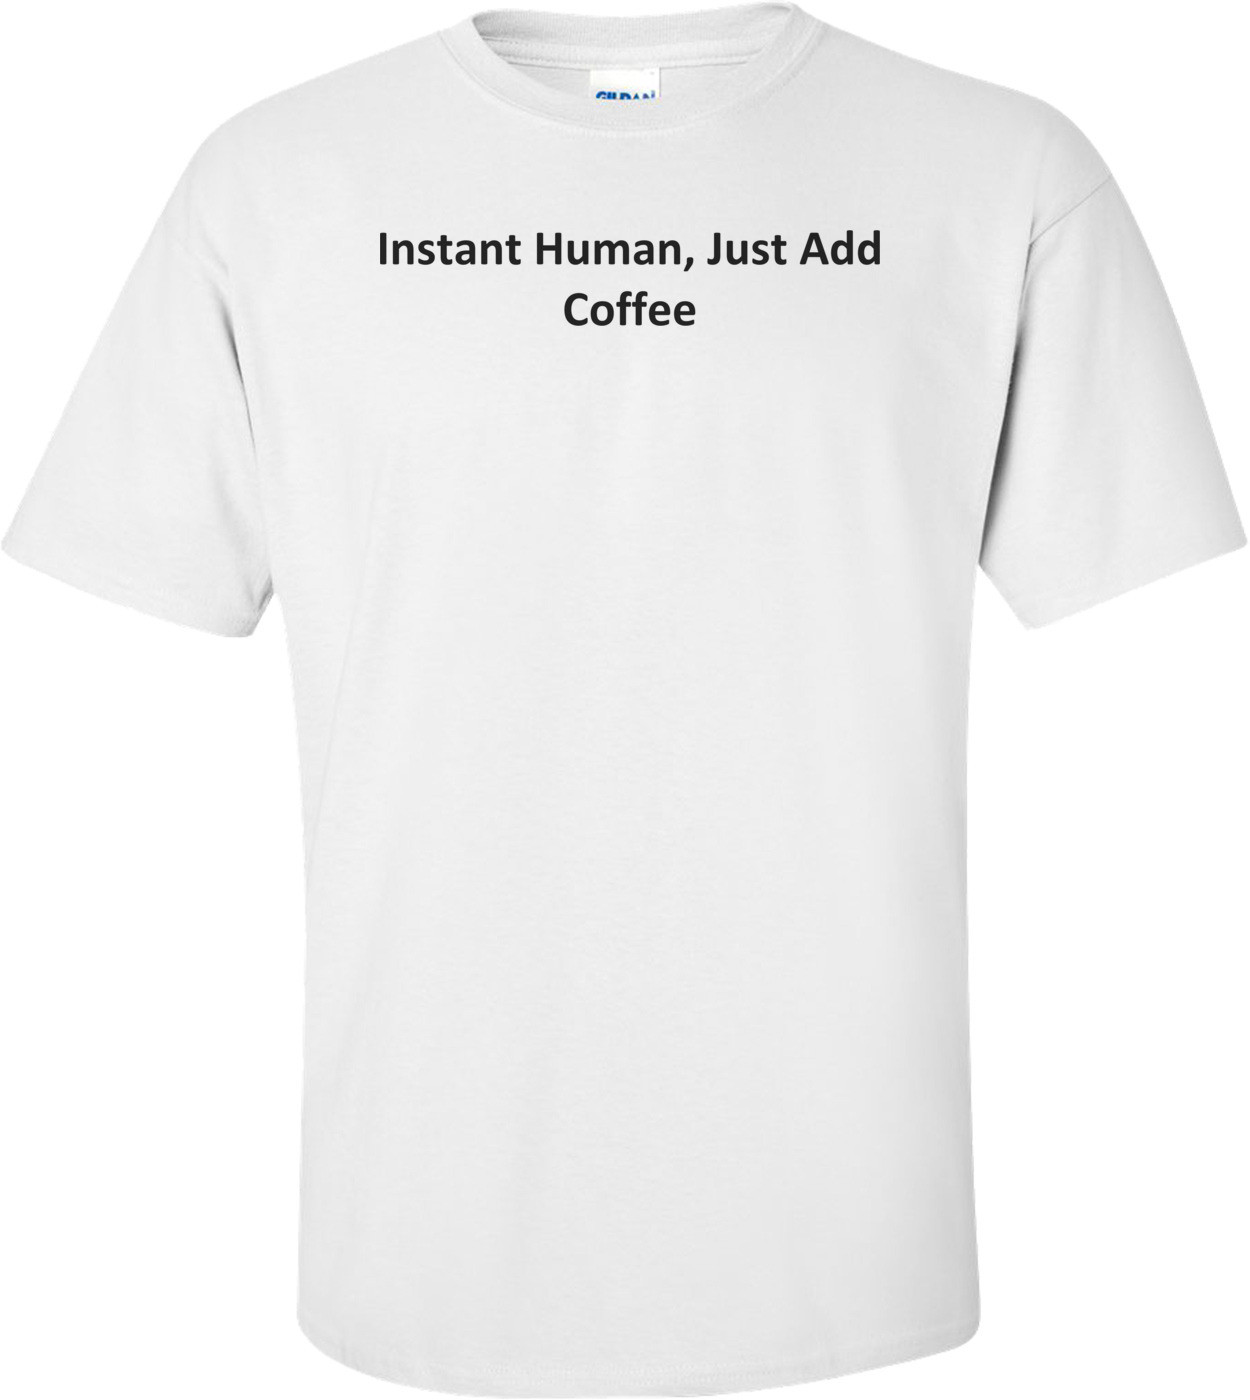 Instant Human, Just Add Coffee